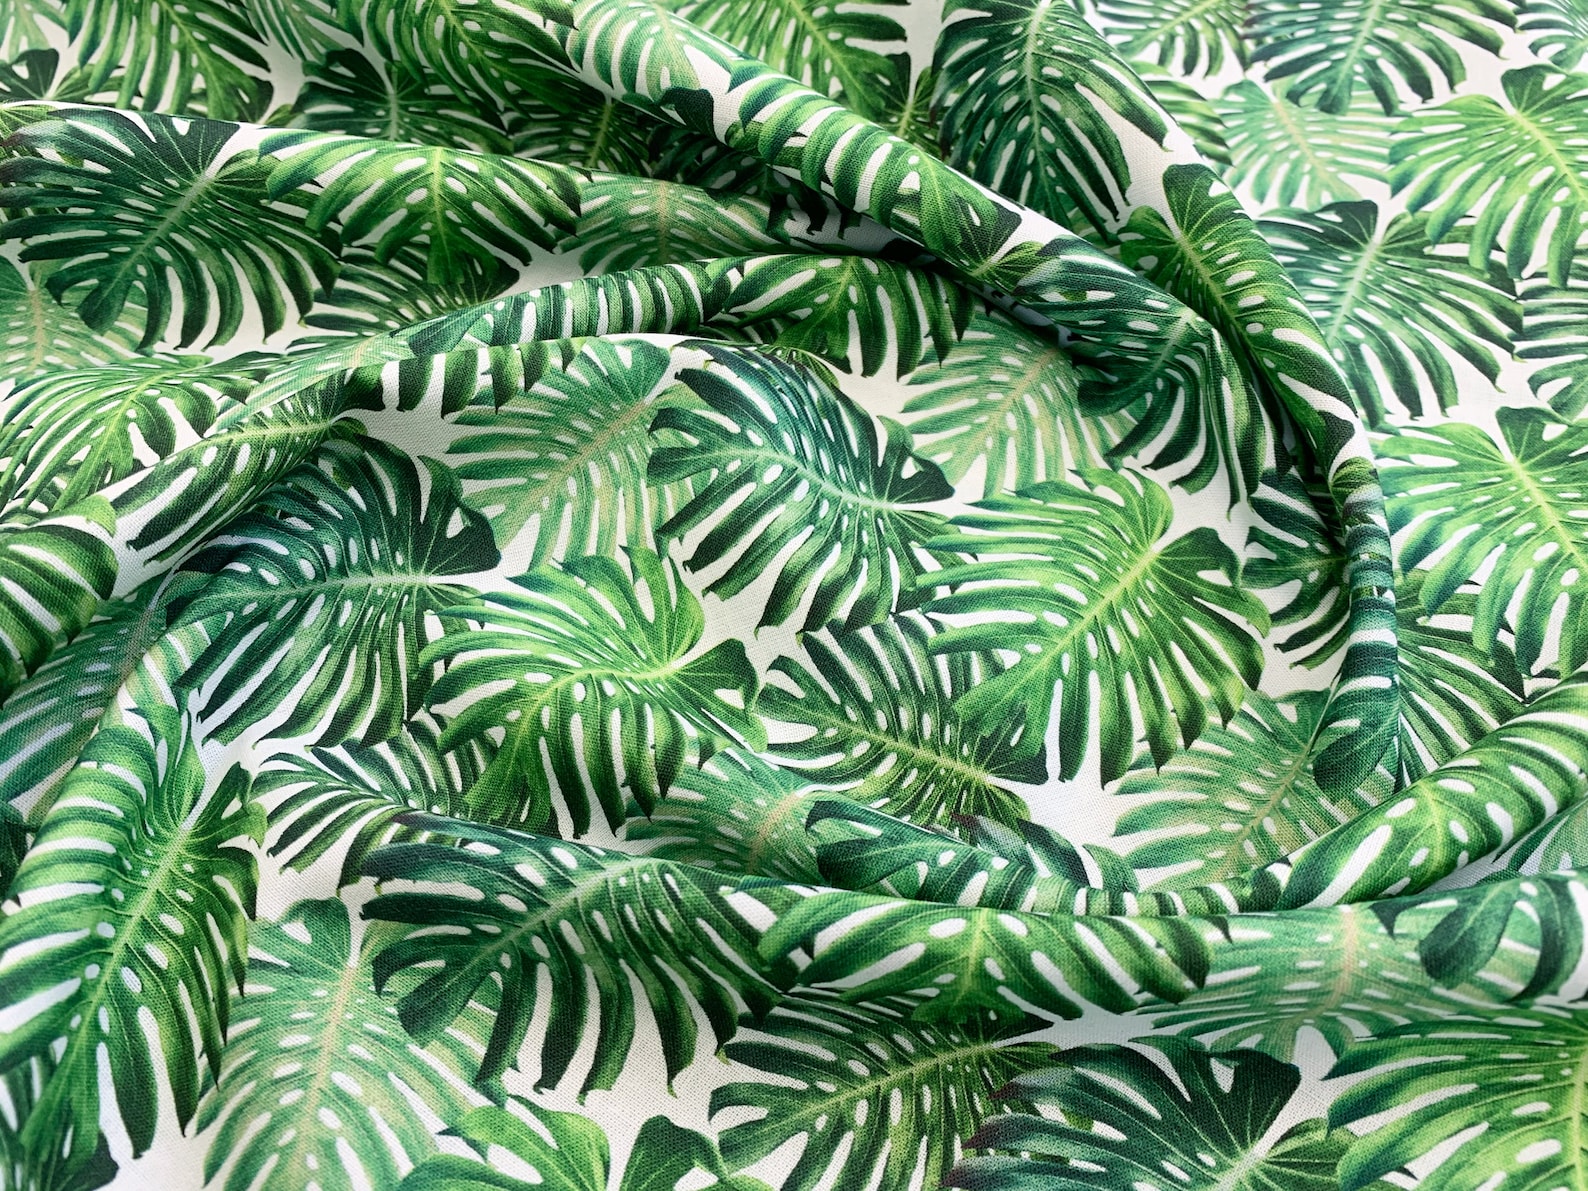 Cotton Fabric Green Palm Leaf Print Craft Fabric Material | Etsy